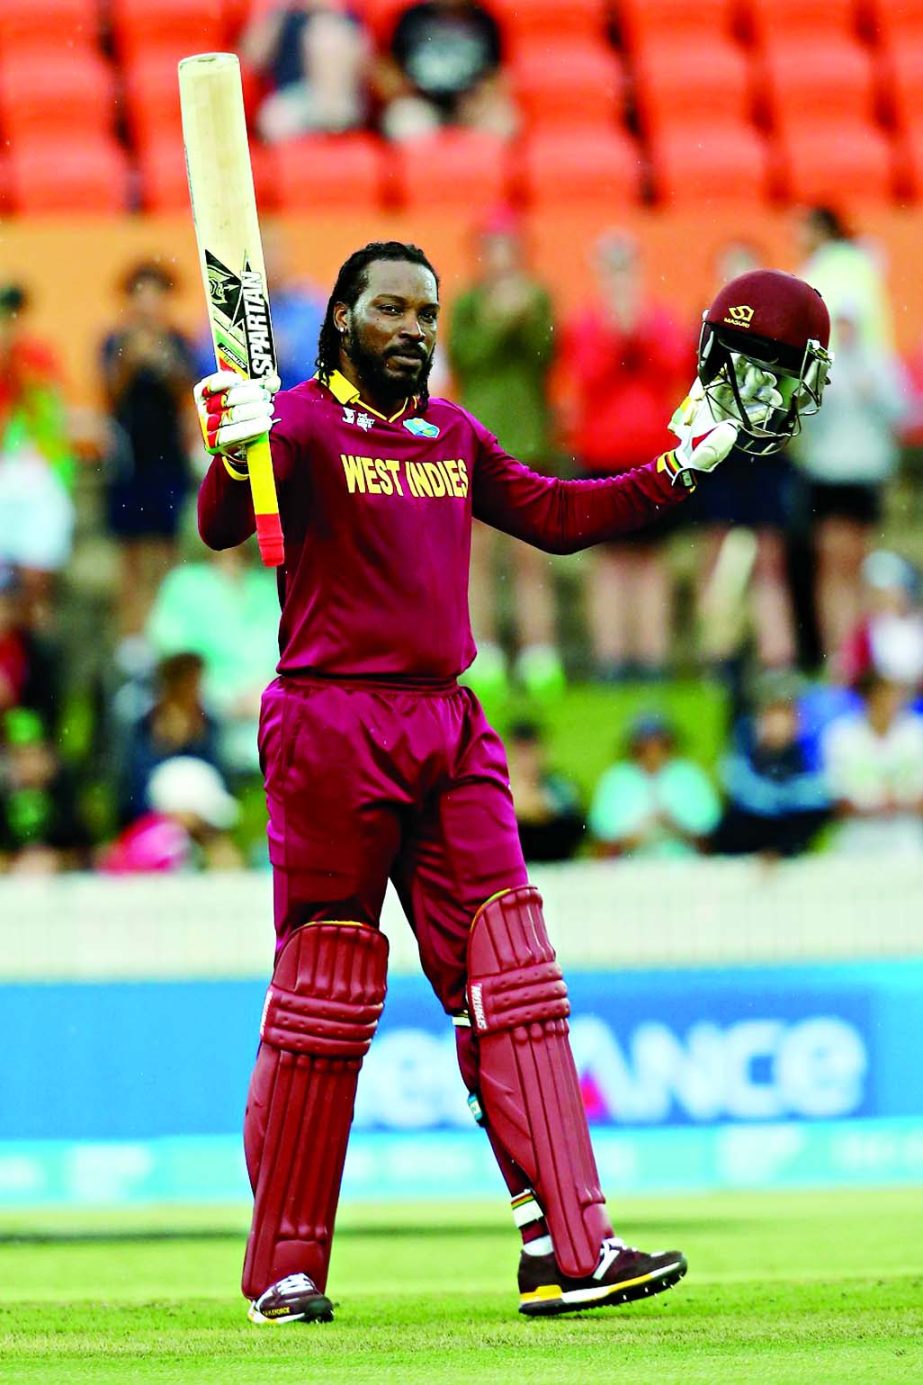 Chris Gayle soaks in the applause after scoring double century during the 2015 ICC Cricket World Cup match between the West Indies and Zimbabwe at Manuka Oval in Canberra, Australia on Tuesday.